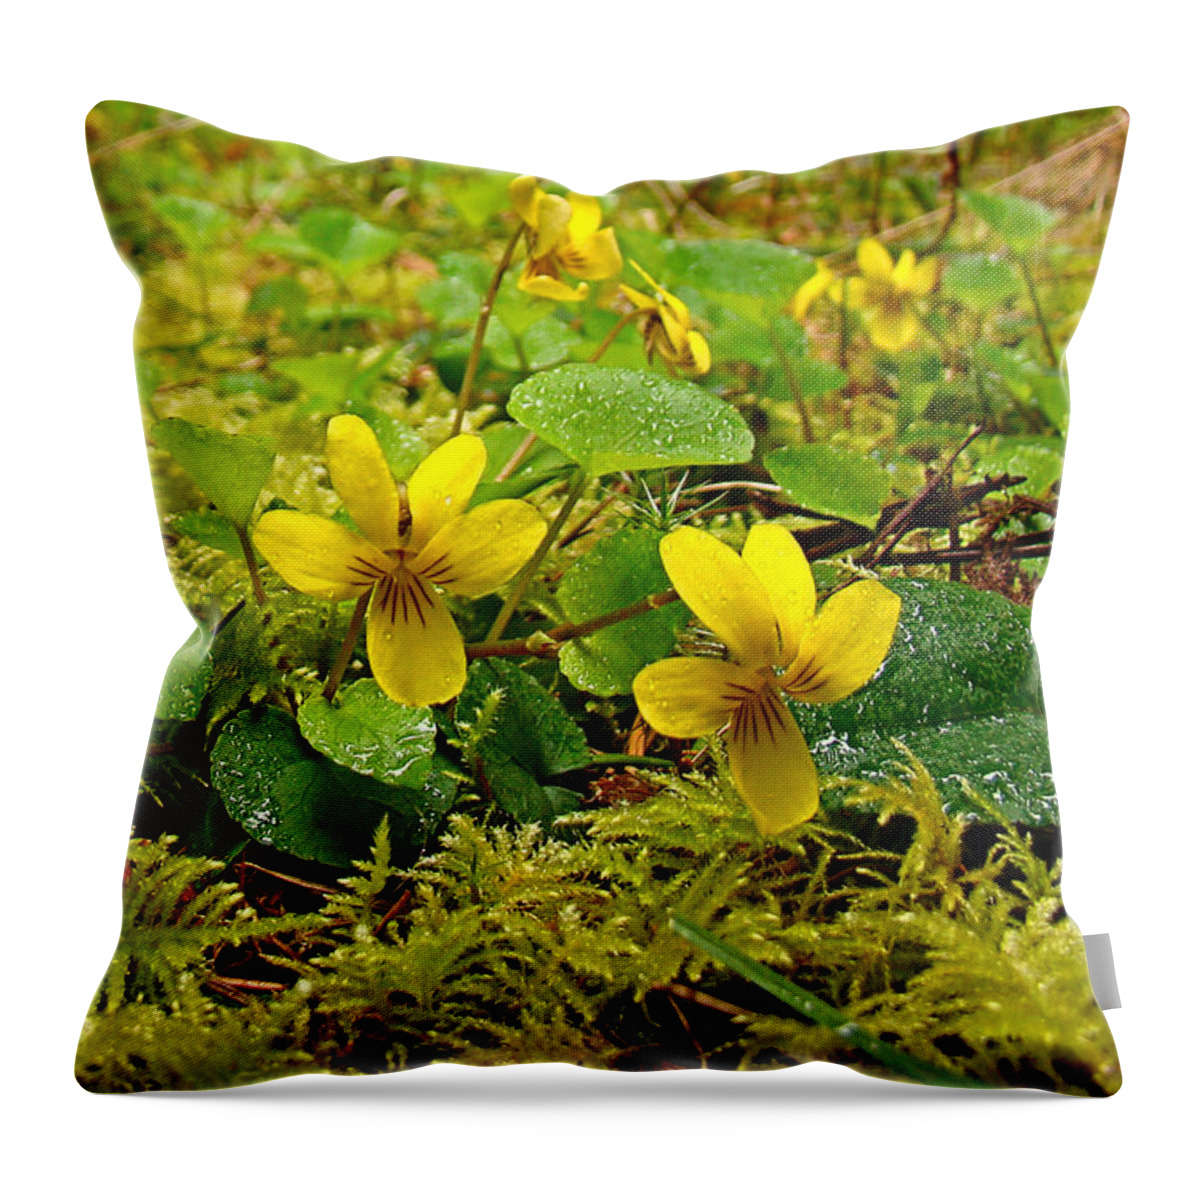 Violet Throw Pillow featuring the photograph Johnny Jump Up by Nick Kloepping